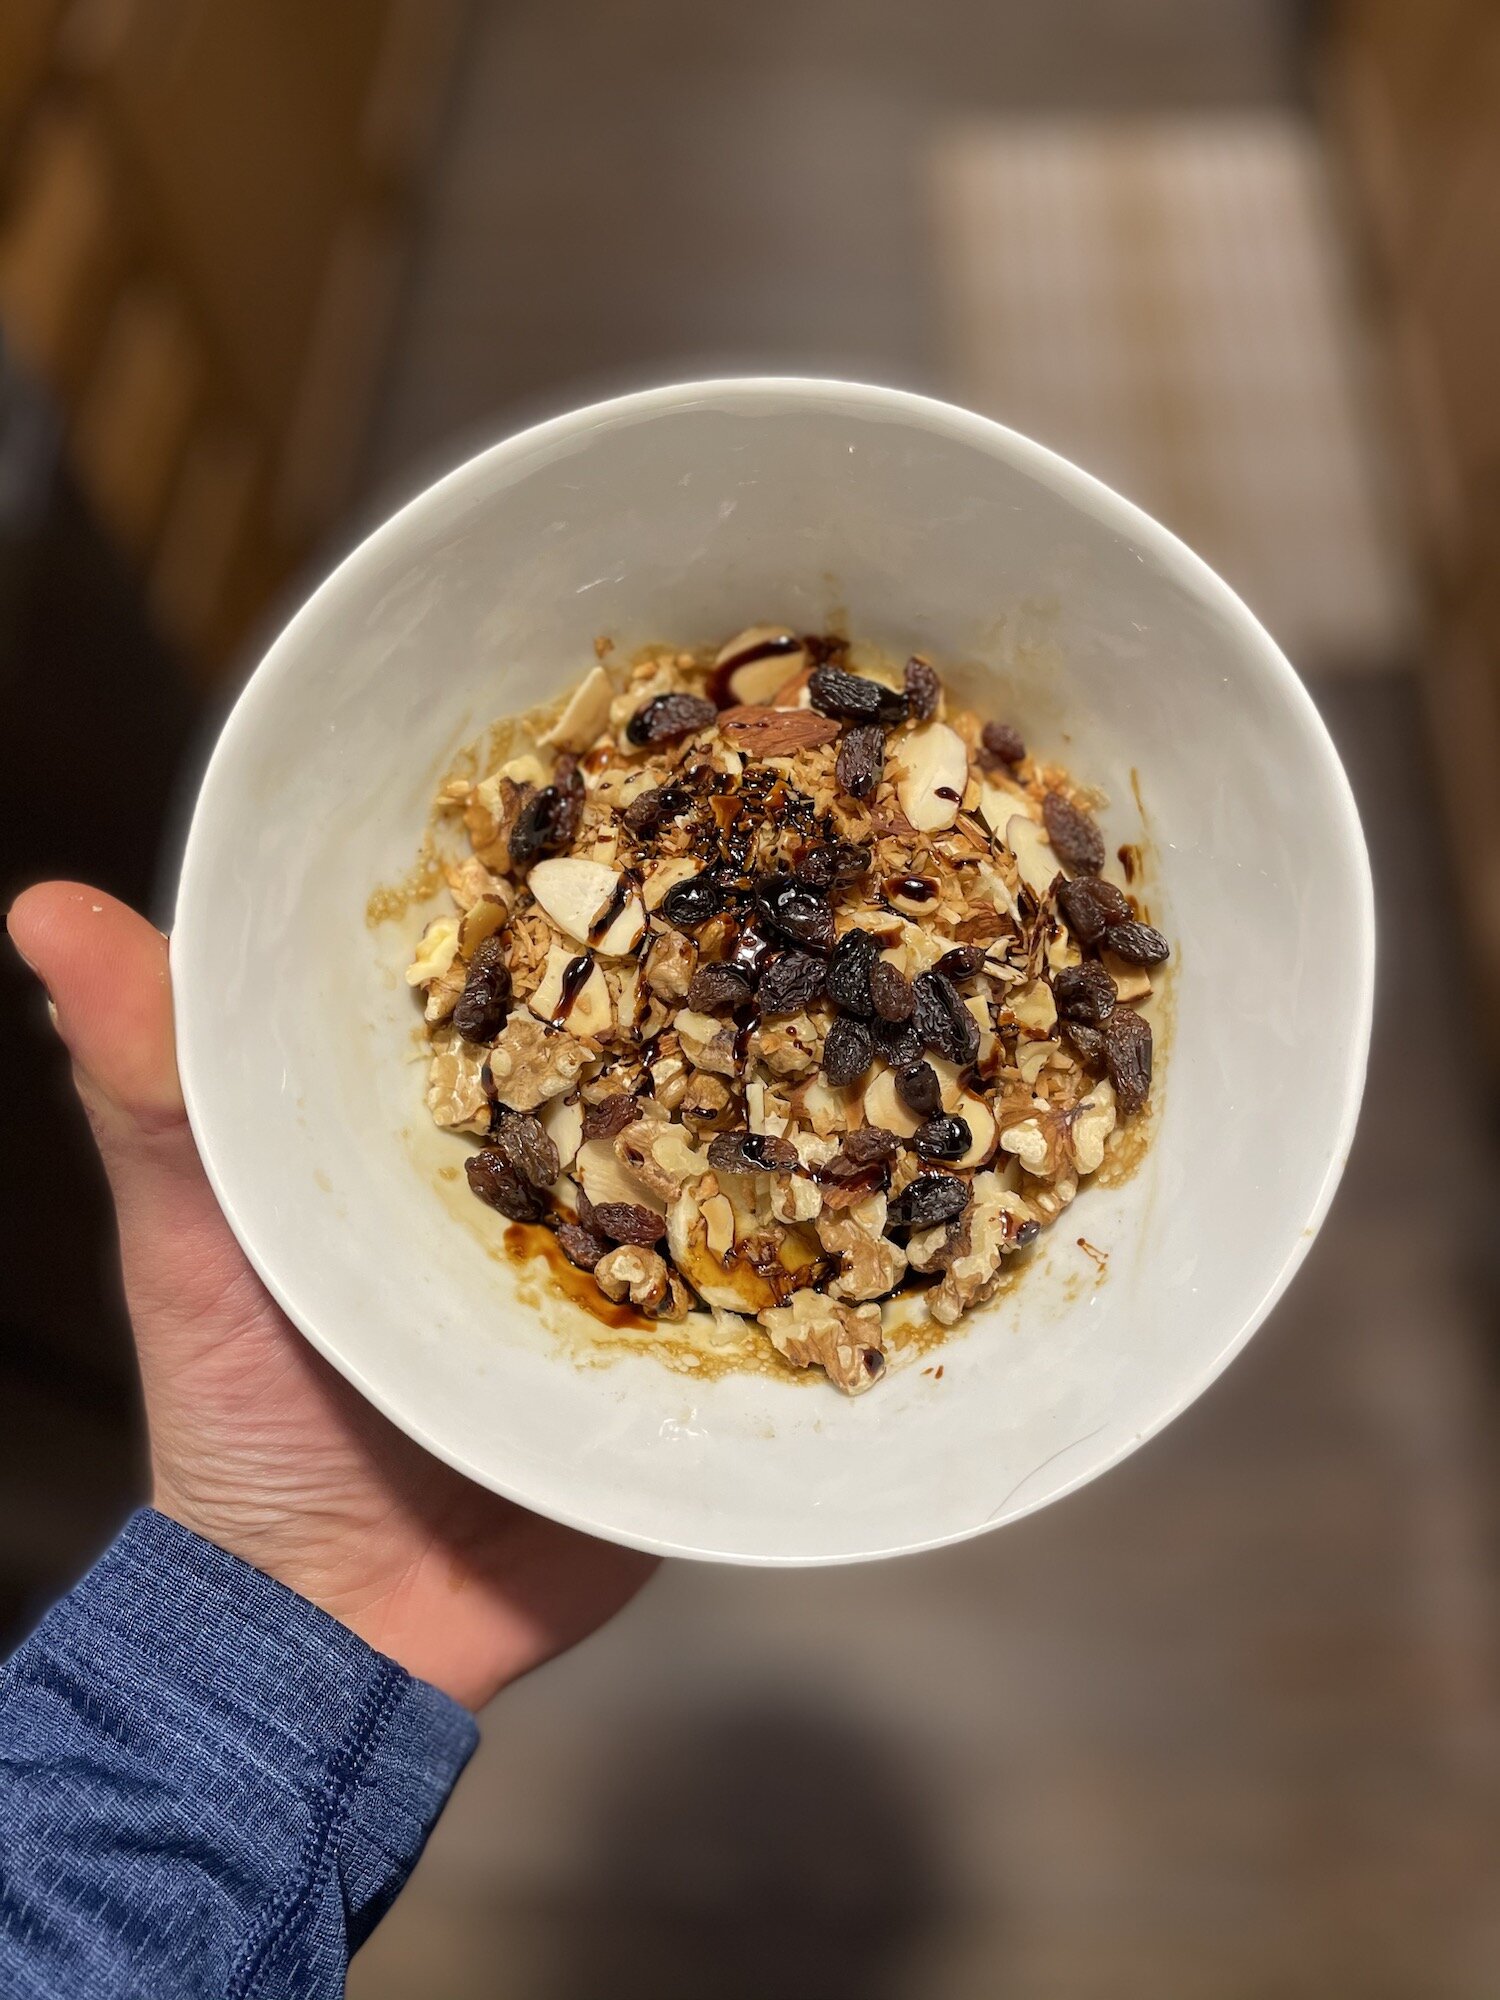 Bijus oatmeal from the feed zone cookbook